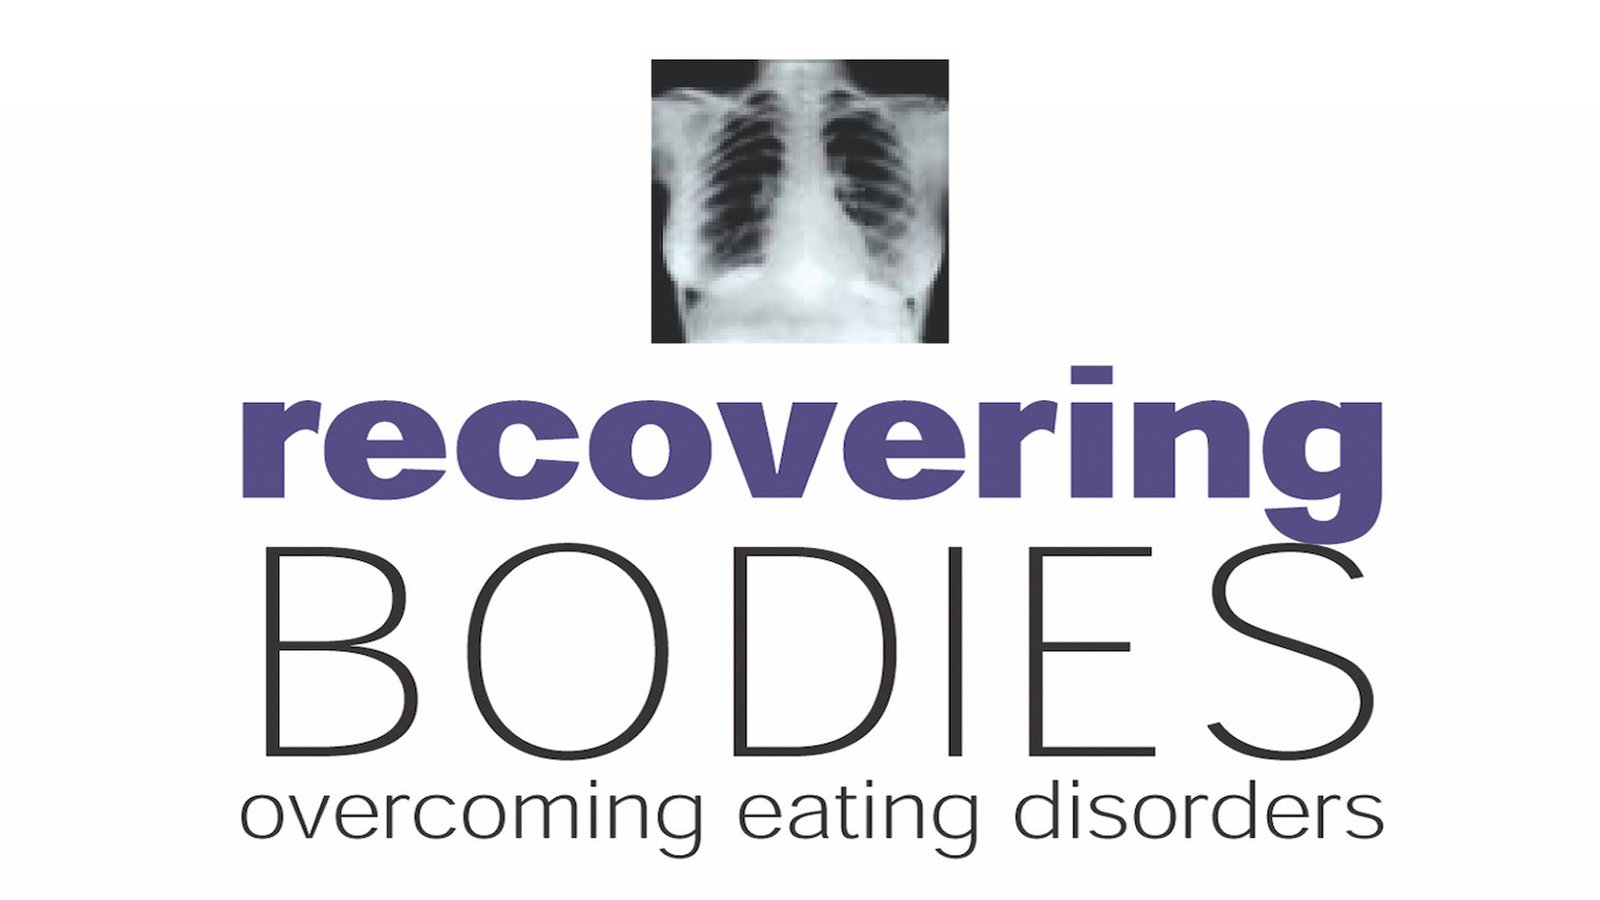 Recovering Bodies: Overcoming Eating Disorders